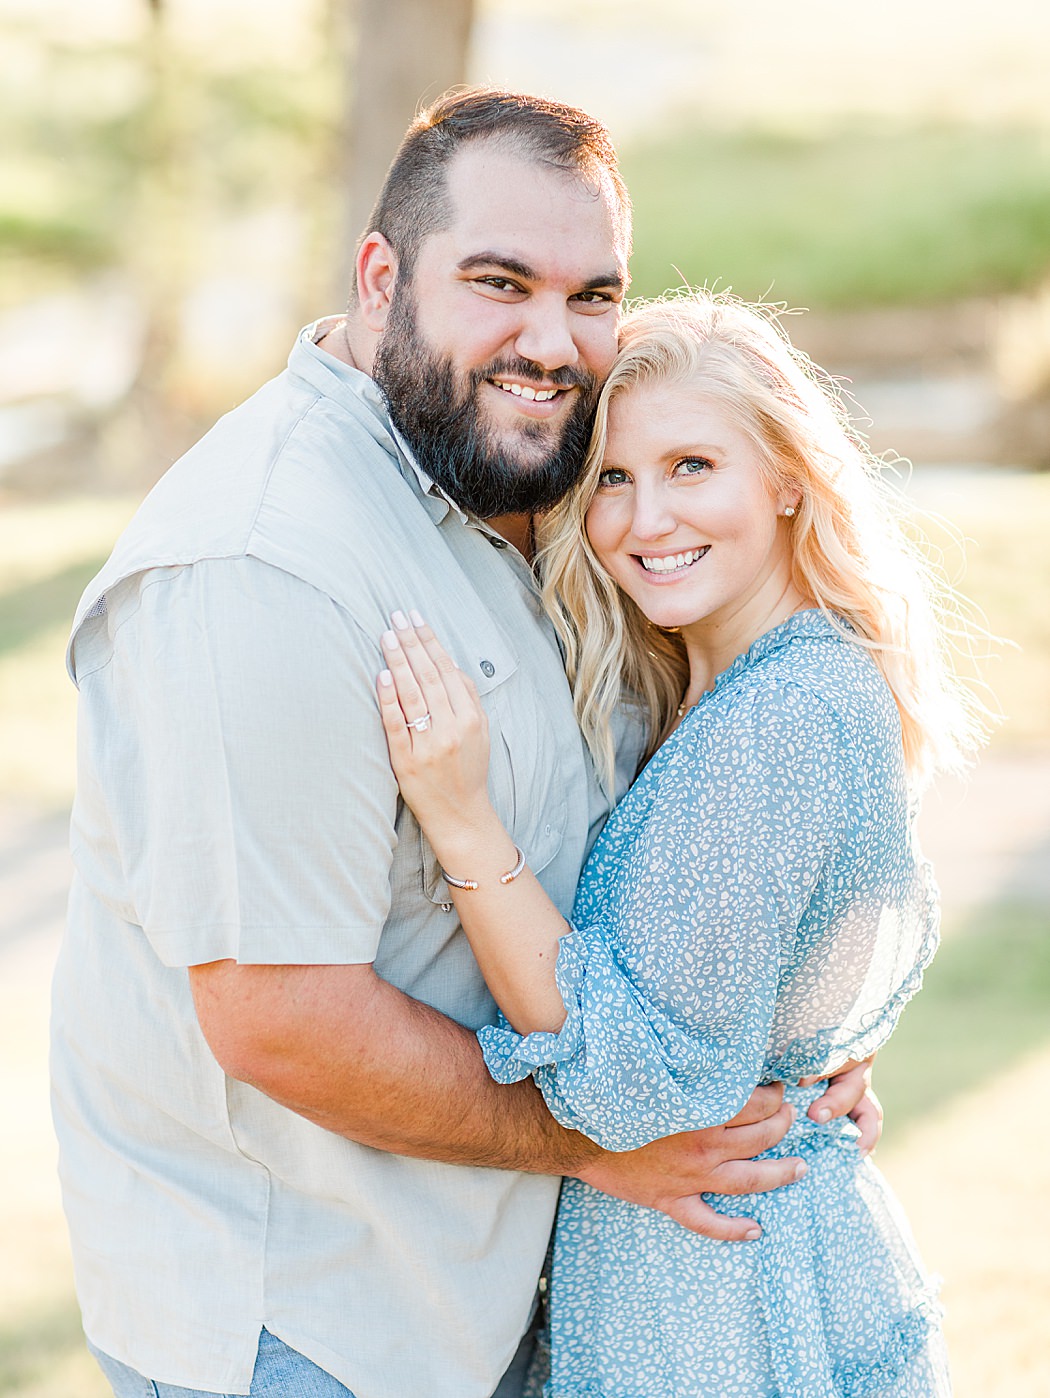 A Hill Country Proposal in Boerne Texas 0051